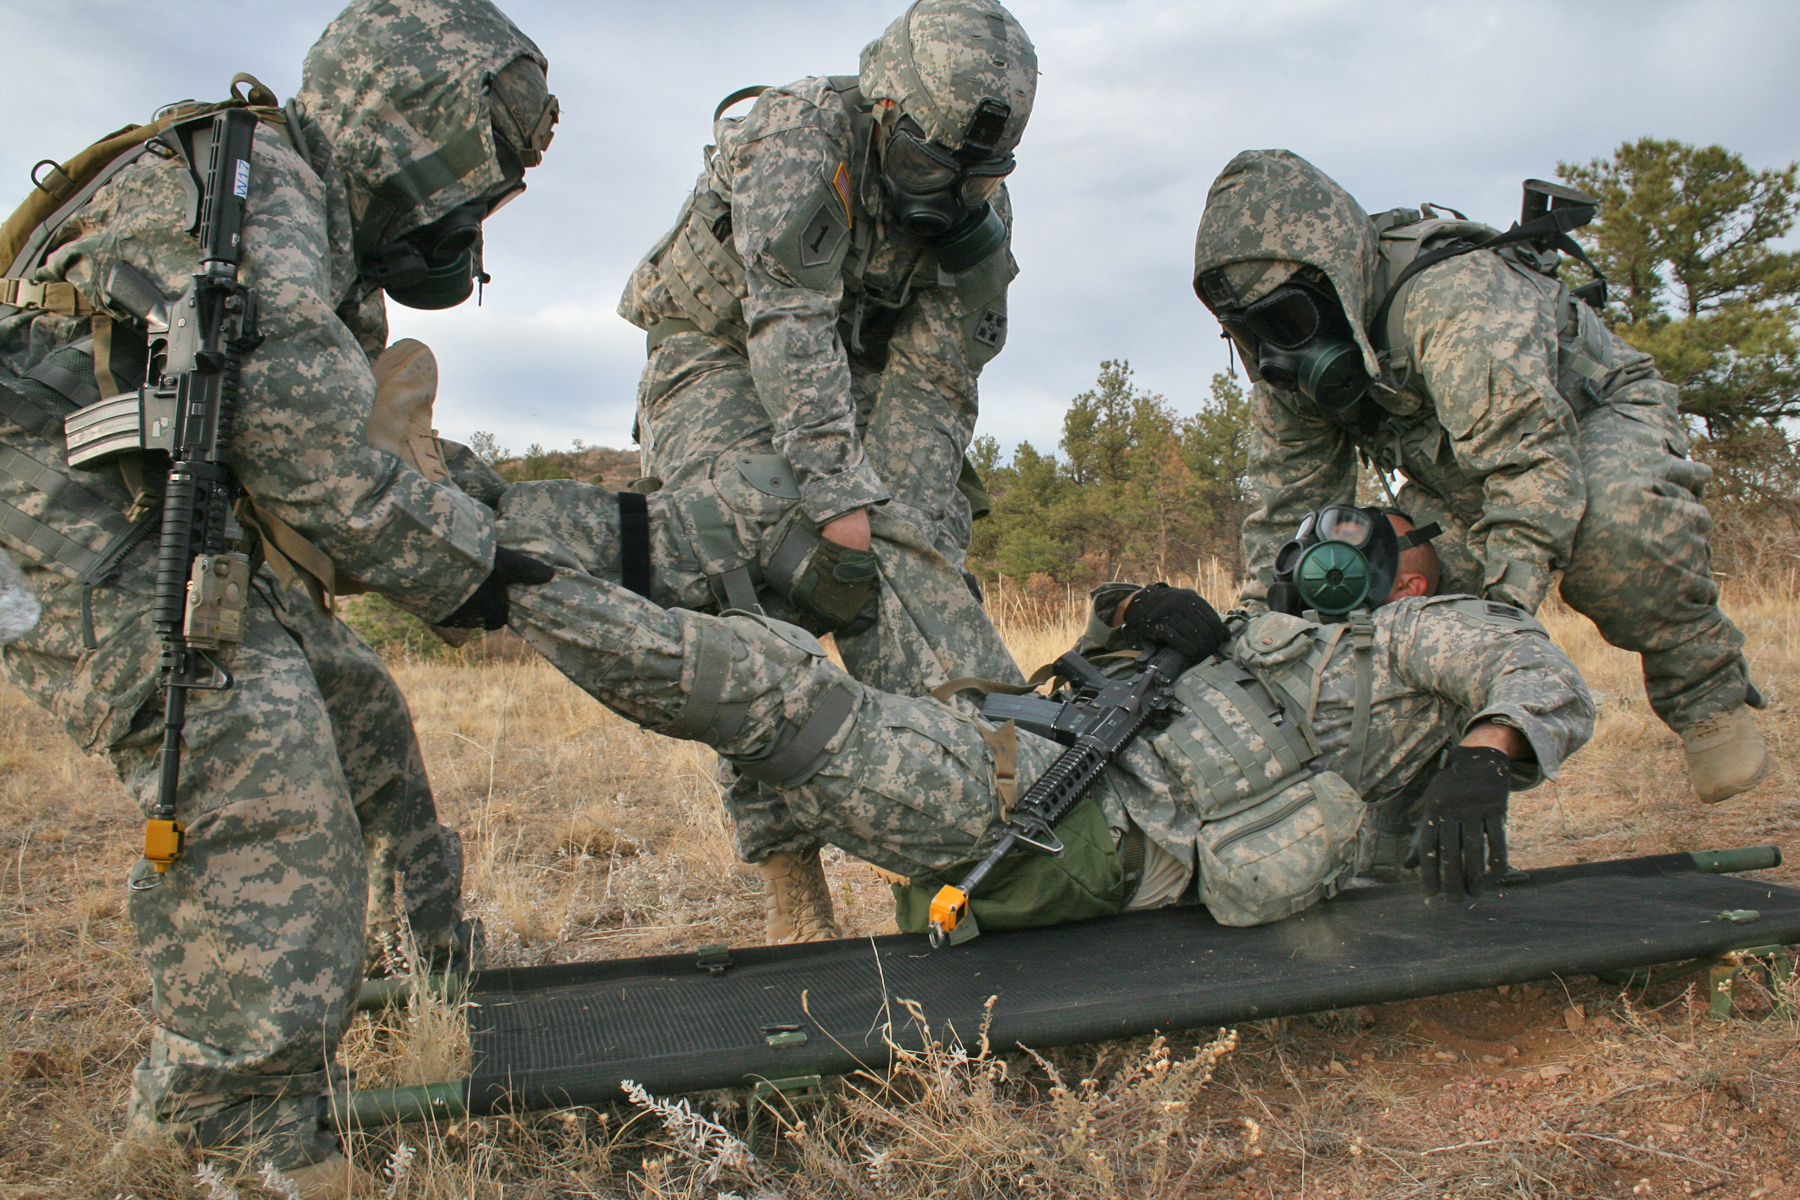 Soldiers with 1st Squadron, 10th Cavalry Regiment, 2nd Brigade Combat Team, 4th Infantry Division, move an injured soldier onto a litter during the chemical, biological, radiological and nuclear testing phase during the squadron's annual spur ride, Nov. 1, 2012. The tasks the spur candidates were required to complete included a physical fitness test, a written test, vehicle identification, an obstacle course and a land navigation course carrying a 40-65 pound rucksack and at each point on the course they were tested on basic soldiering skills. (U.S. Army photo by Staff Sgt. Ruth Pagan, 2nd BCT PAO, 4th Inf. Div.)